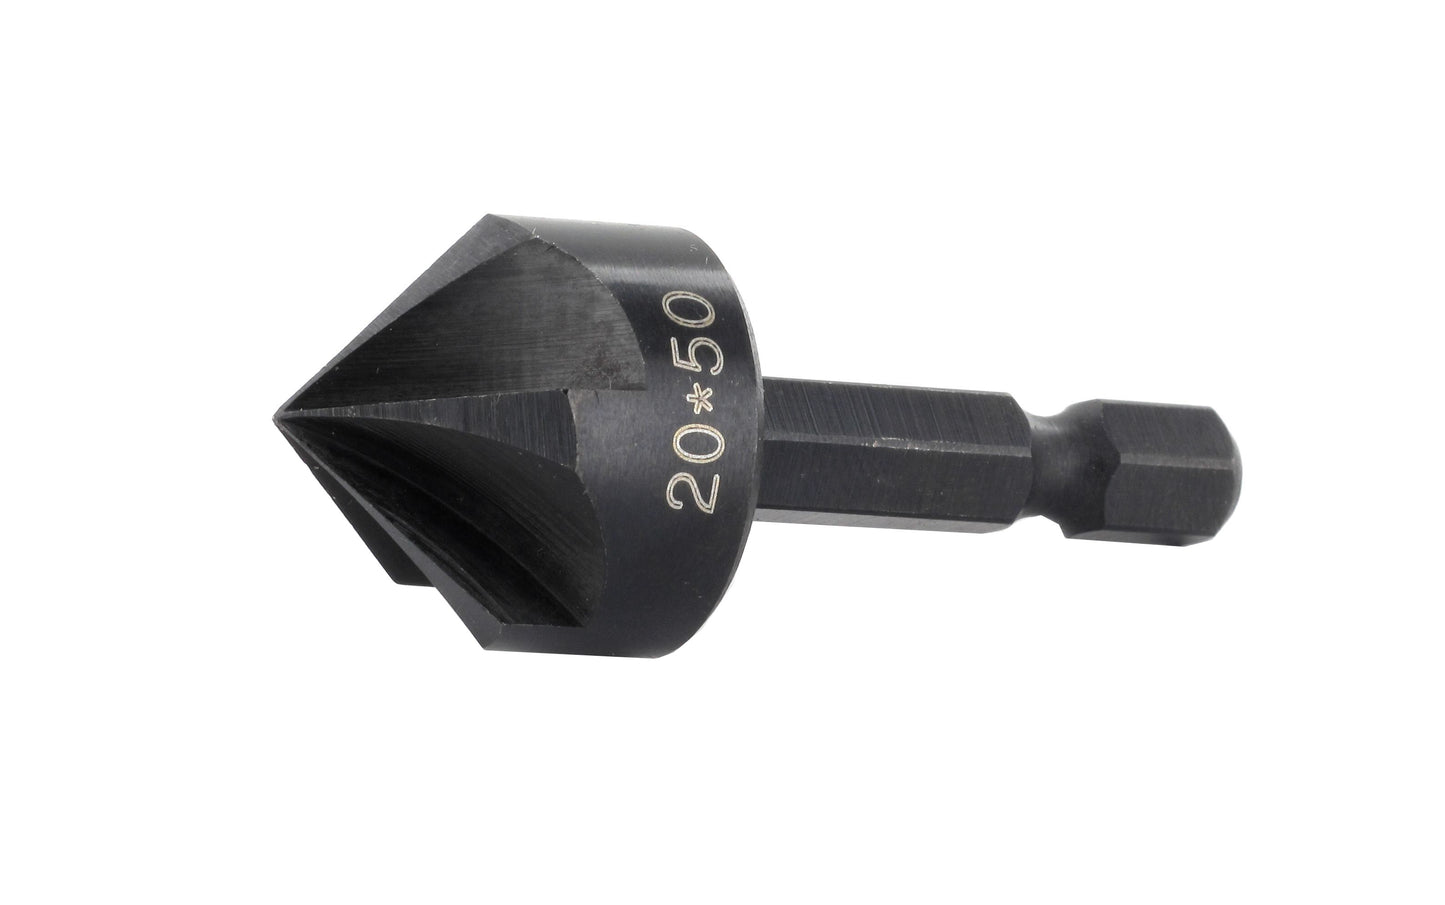 FAMAG Countersink, alloyed tool steel, with 5 edges, point angle 90°,Bit shank E6,3:Ø14, 3532014